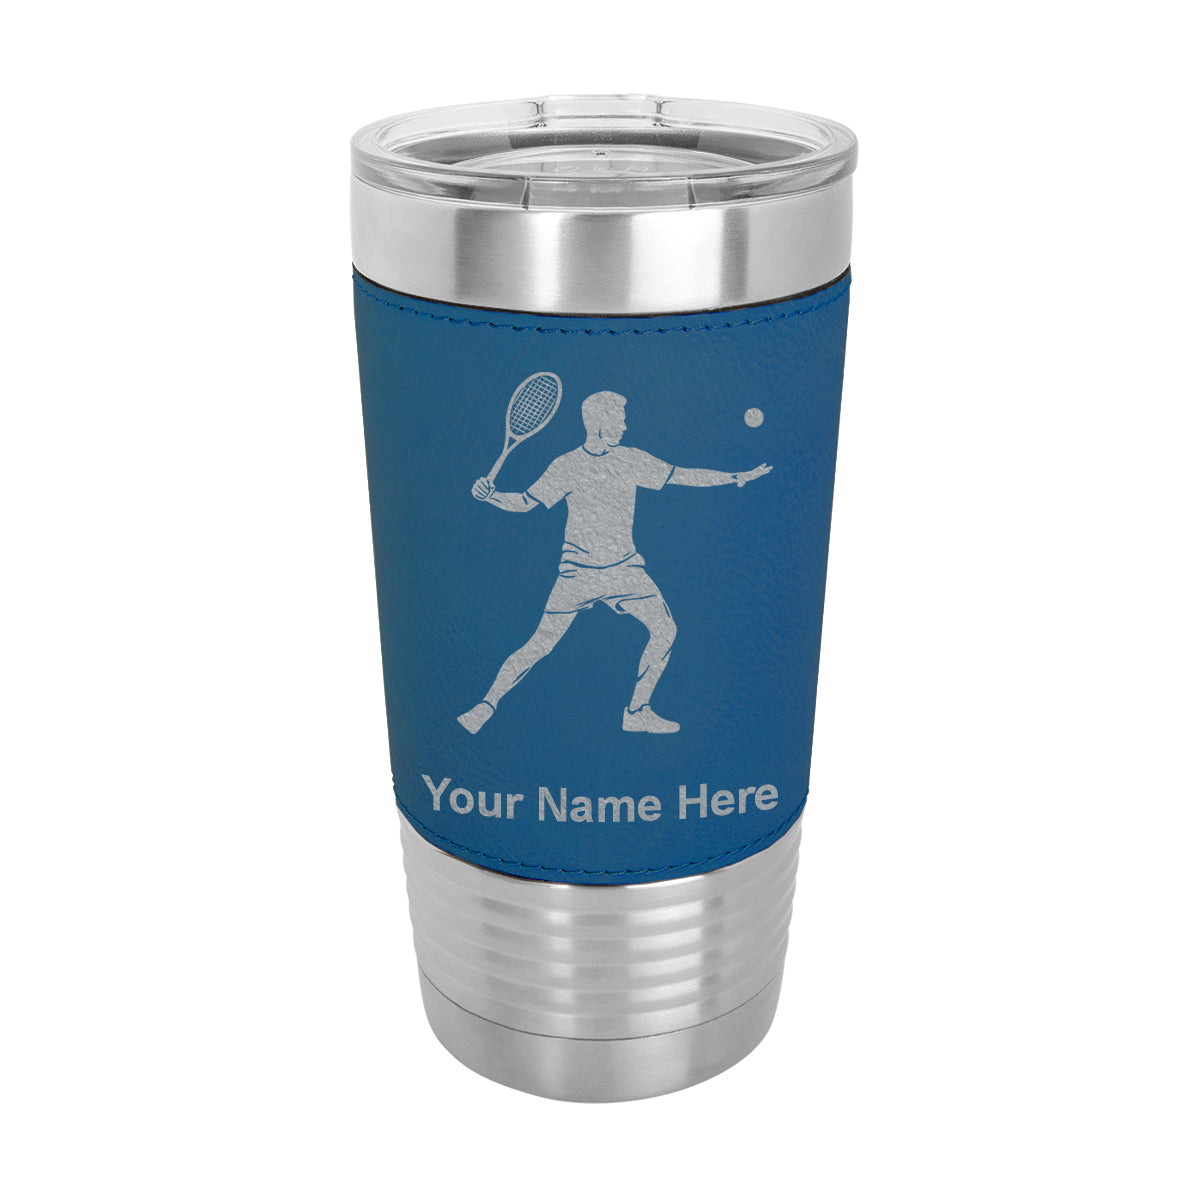 20oz Faux Leather Tumbler Mug, Tennis Player Man, Personalized Engraving Included